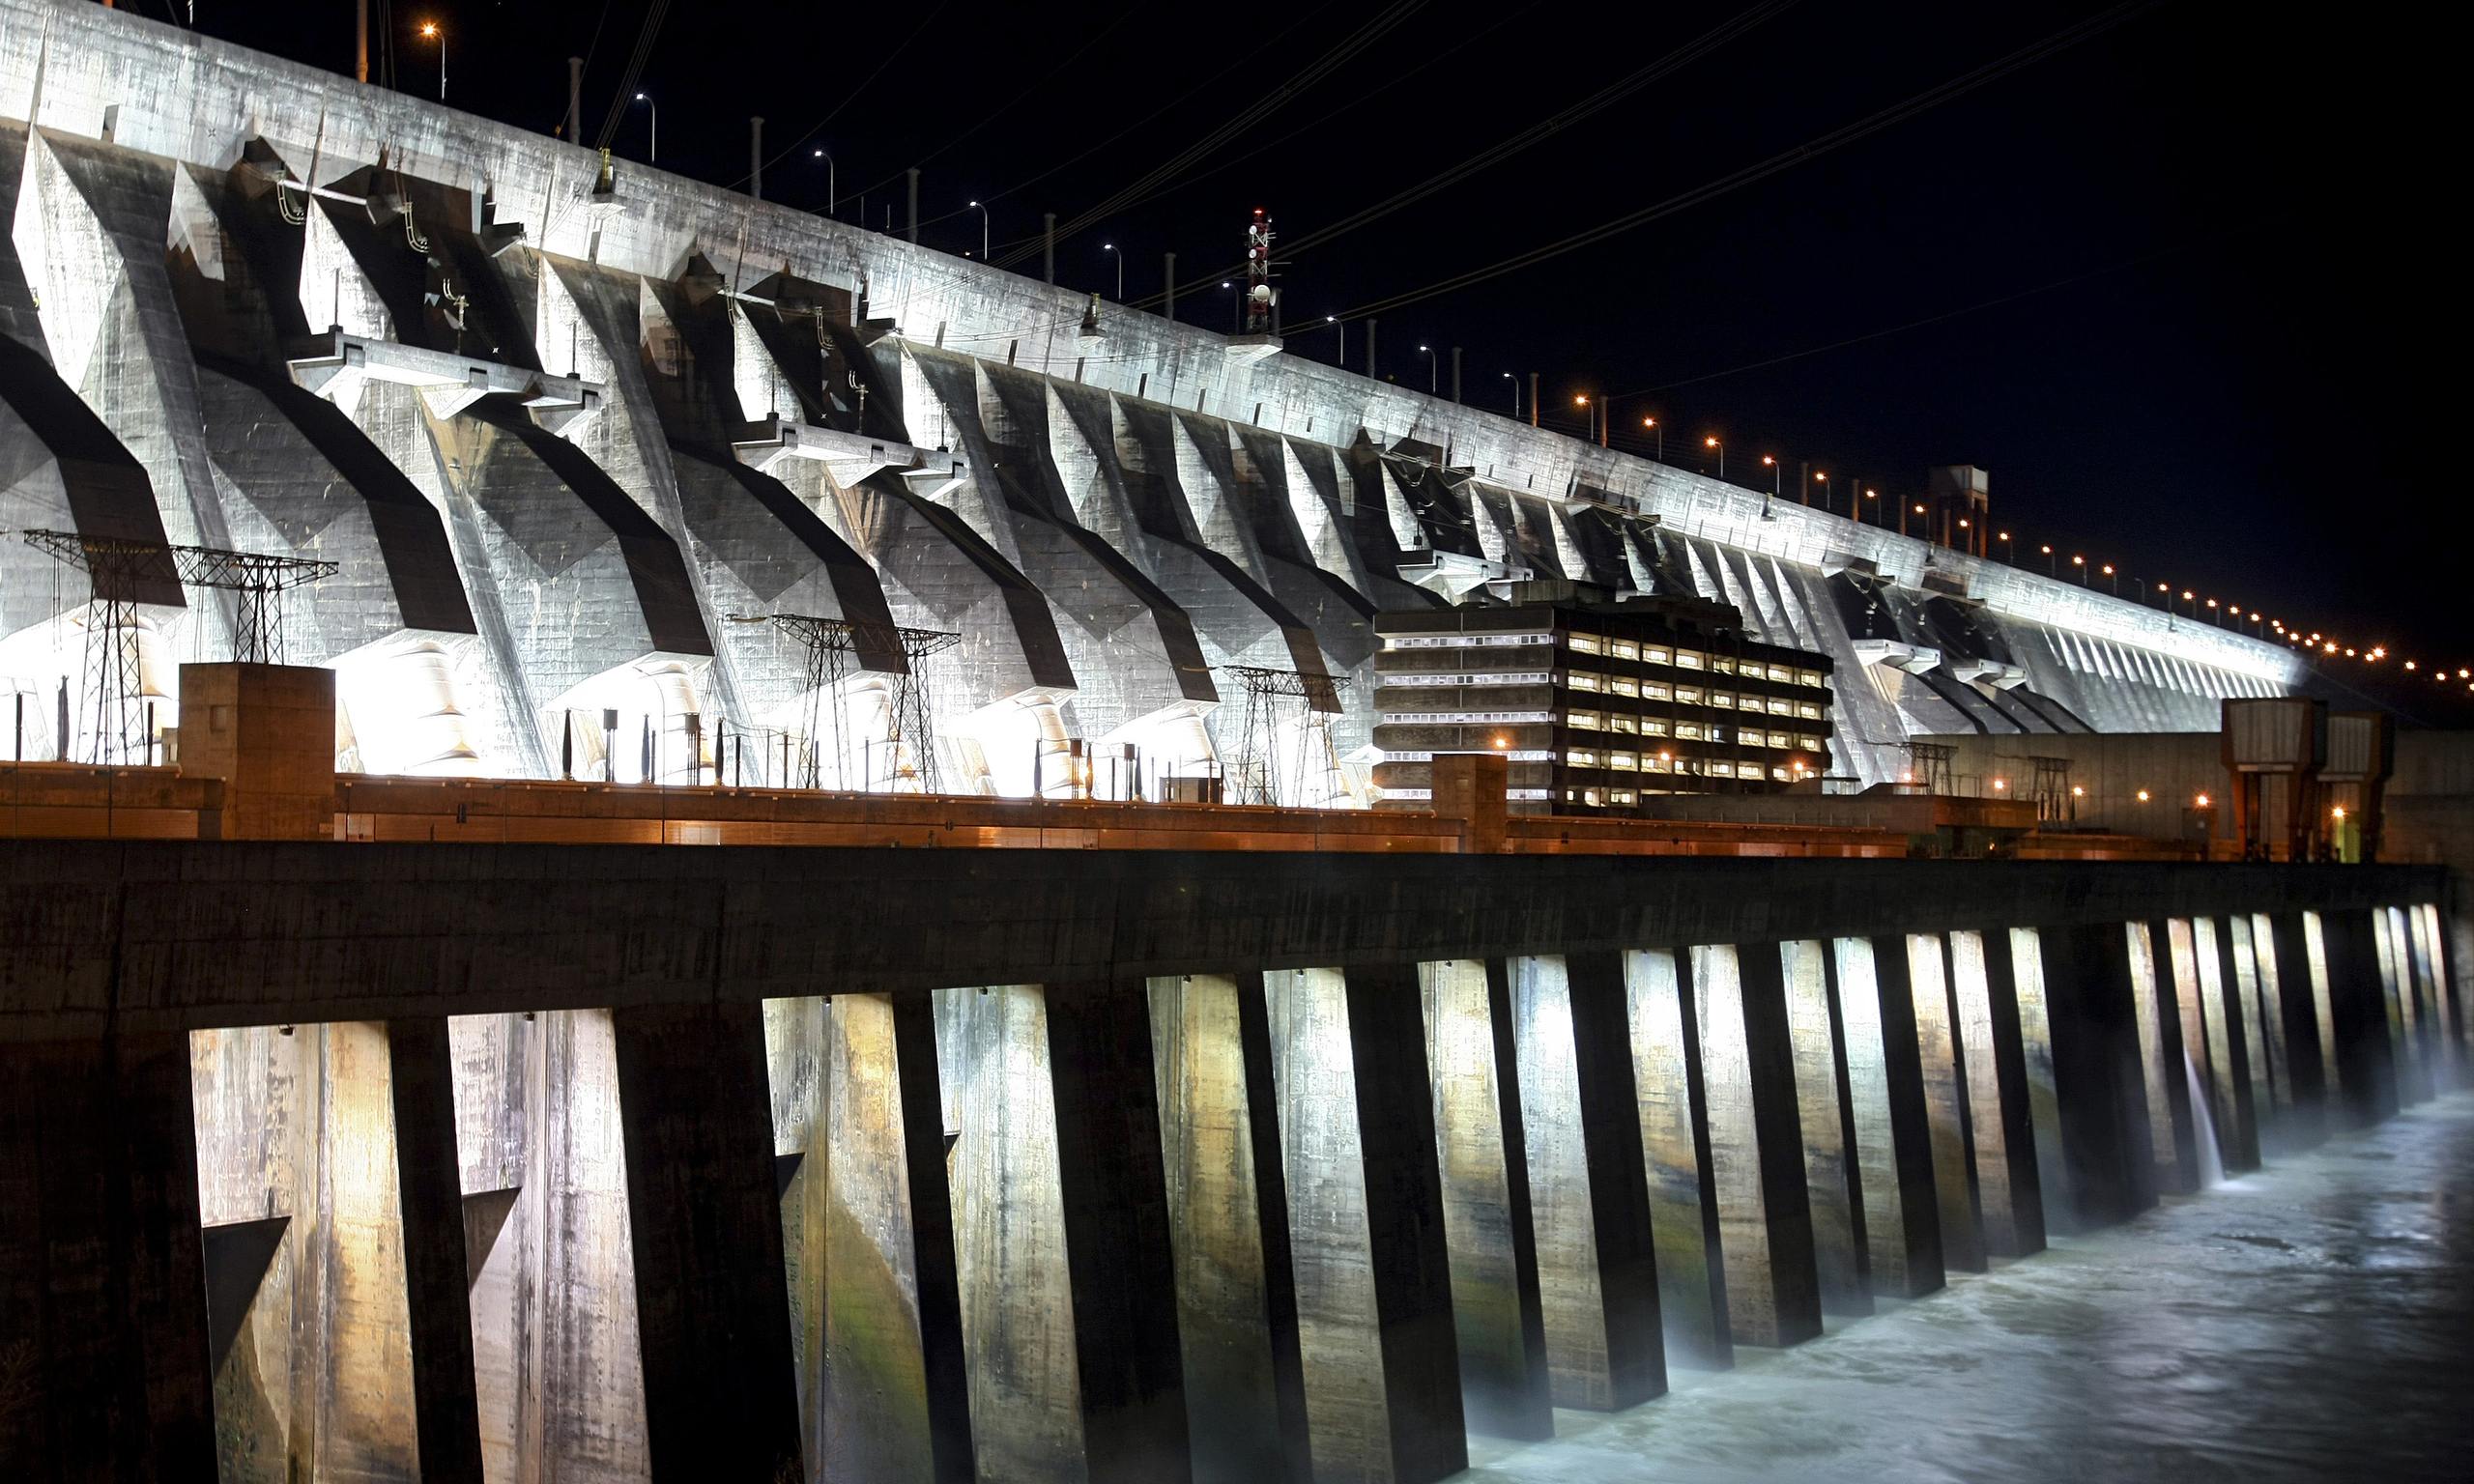 Hydroelectric dams are doing more harm than good to emerging economies